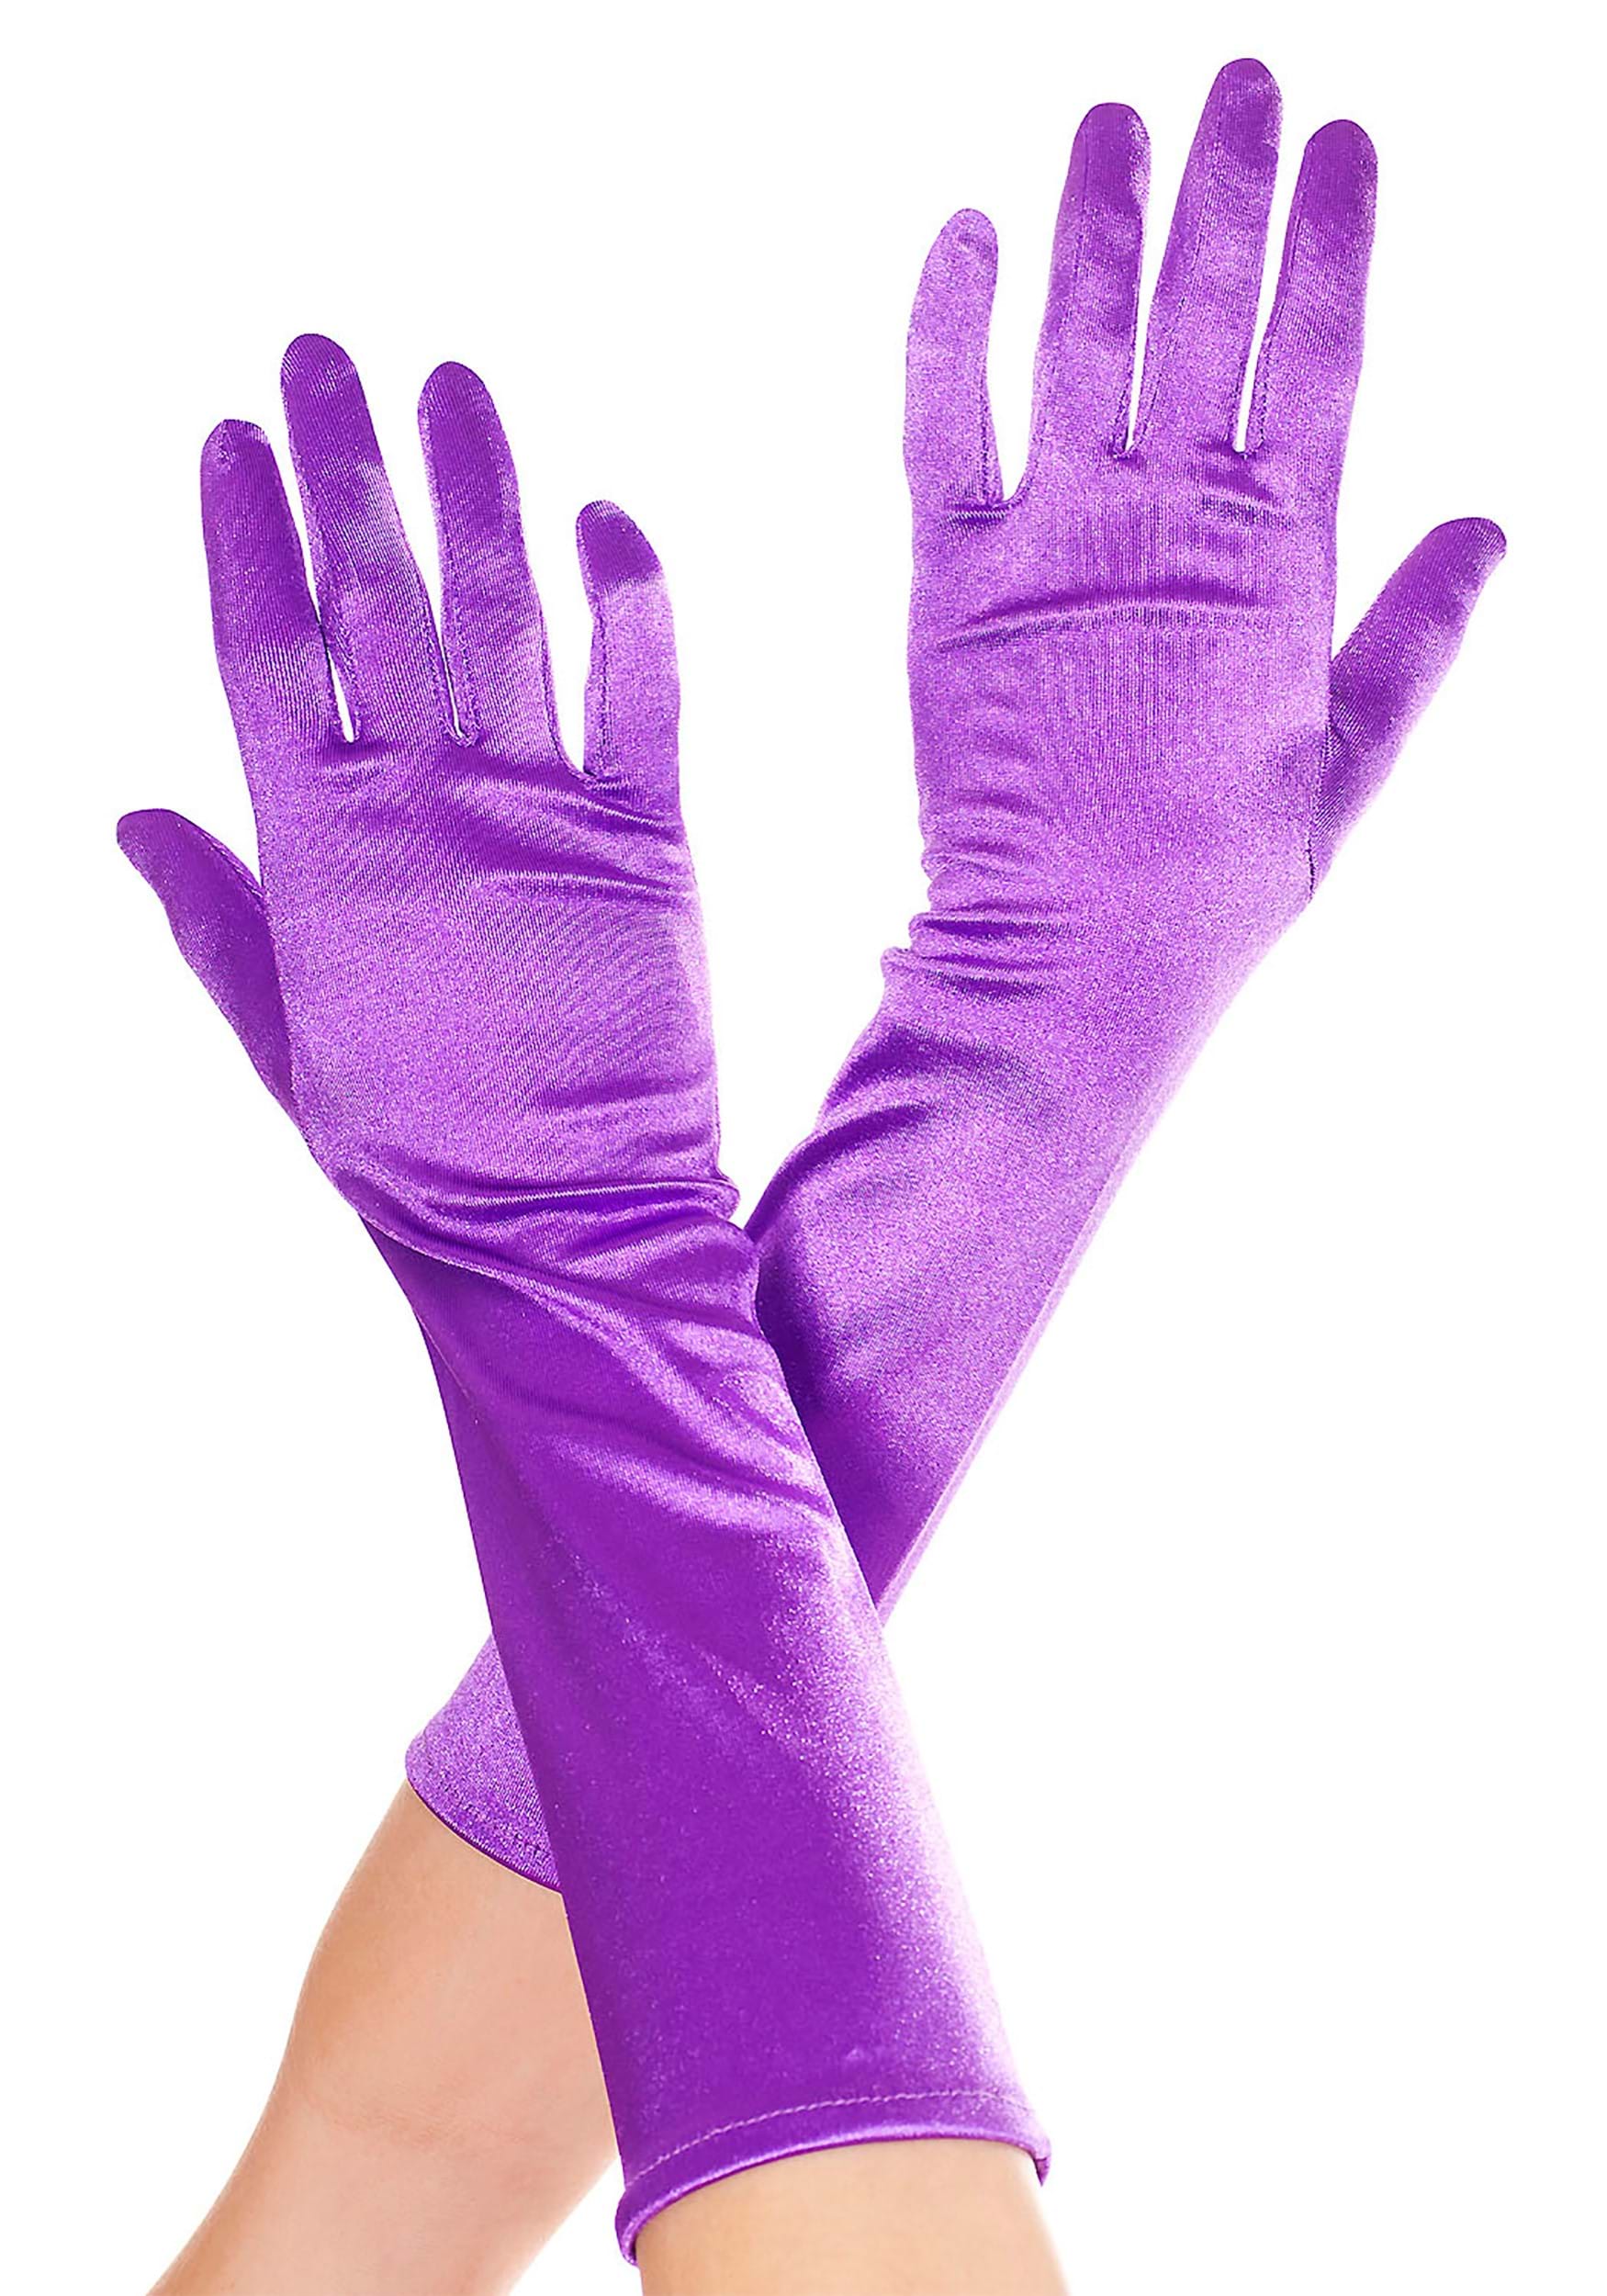 https://images.halloweencostumes.ca/products/74227/1-1/purple-satin-gloves-for-women.jpg